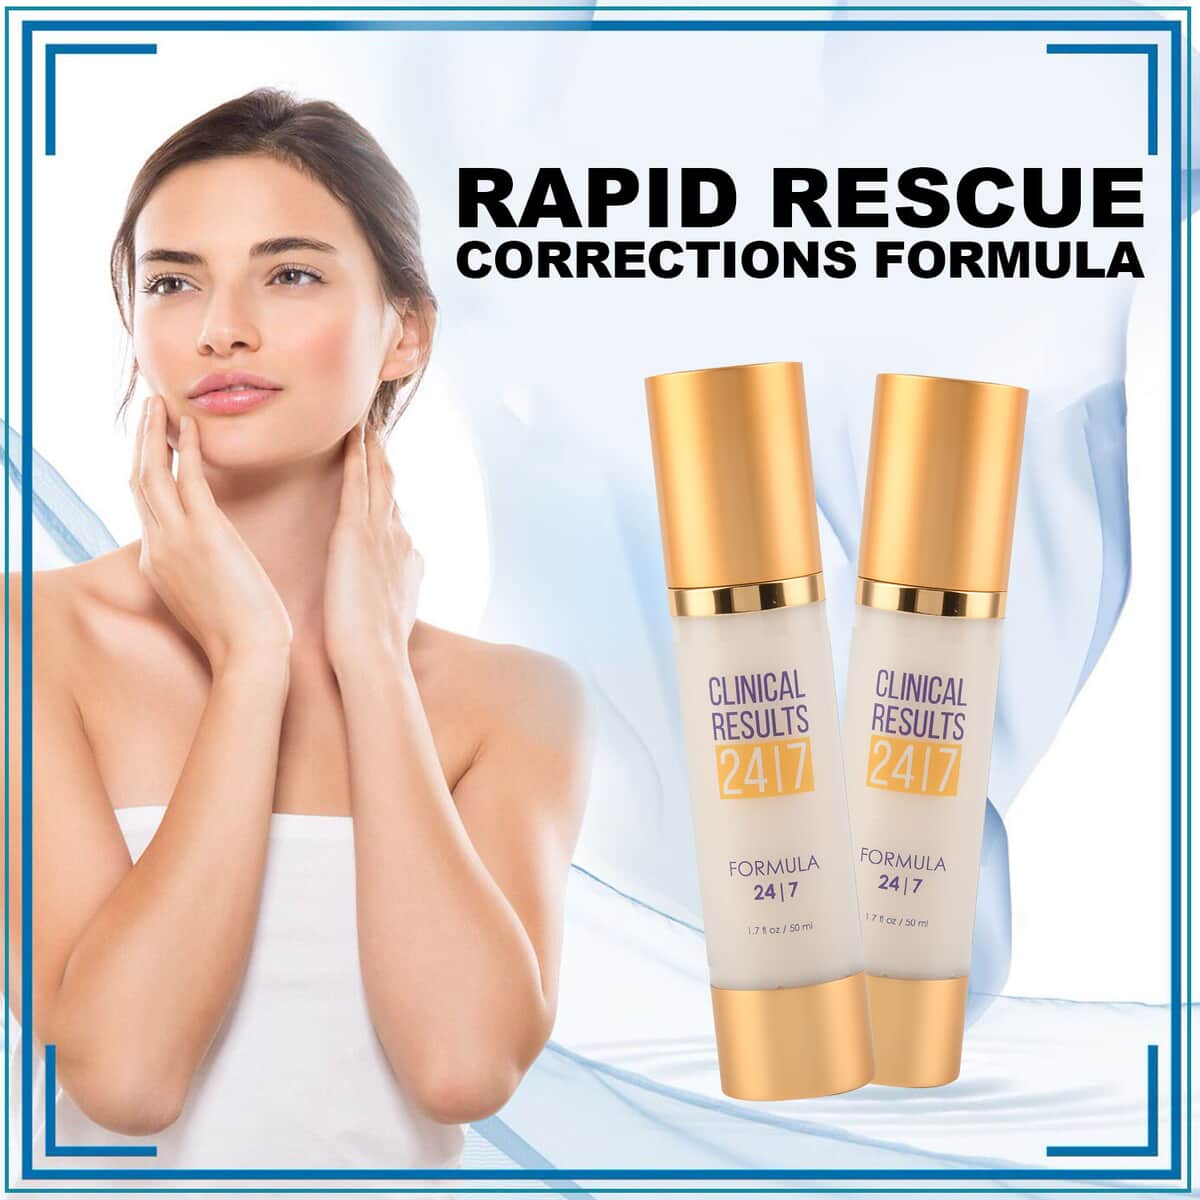 Clinical Results 24.7 Rapid Rescue Corrections Formula 1.7 fl oz | Skincare | Anti Aging | Best Skin Care Products image number 1